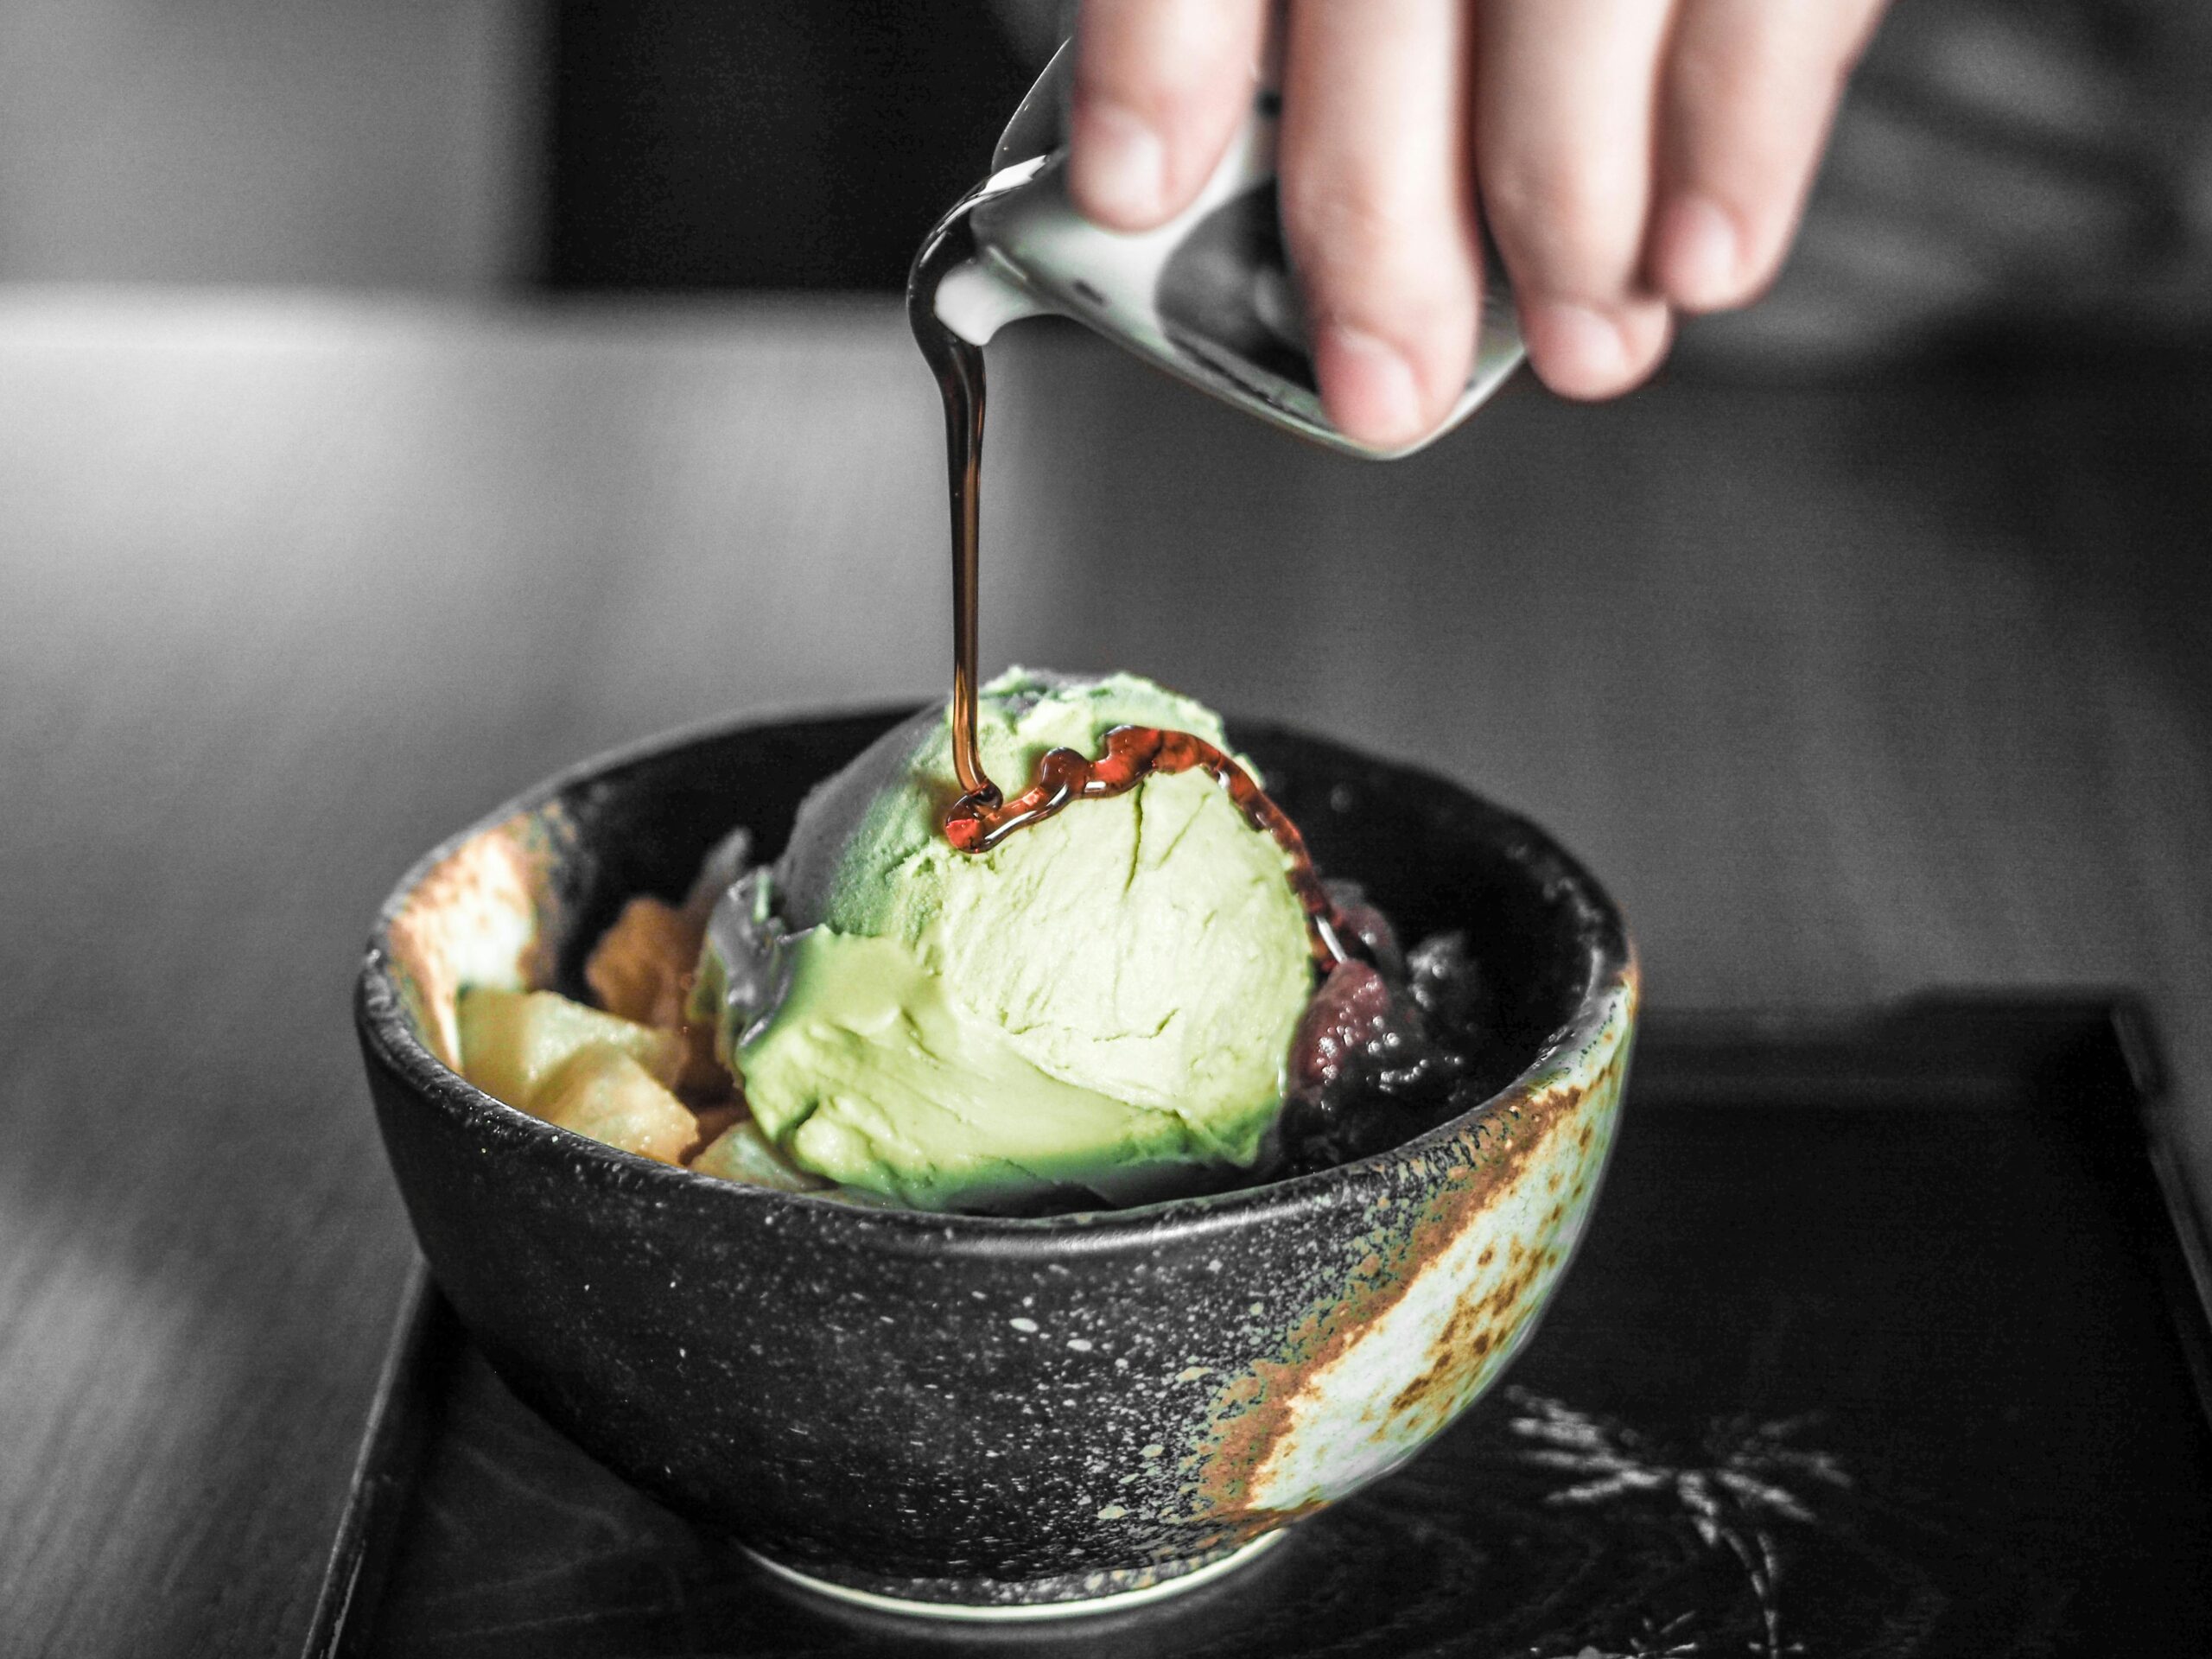 This matcha recipe is perfect for a hot summer day. Pictured: Matcha ice cream